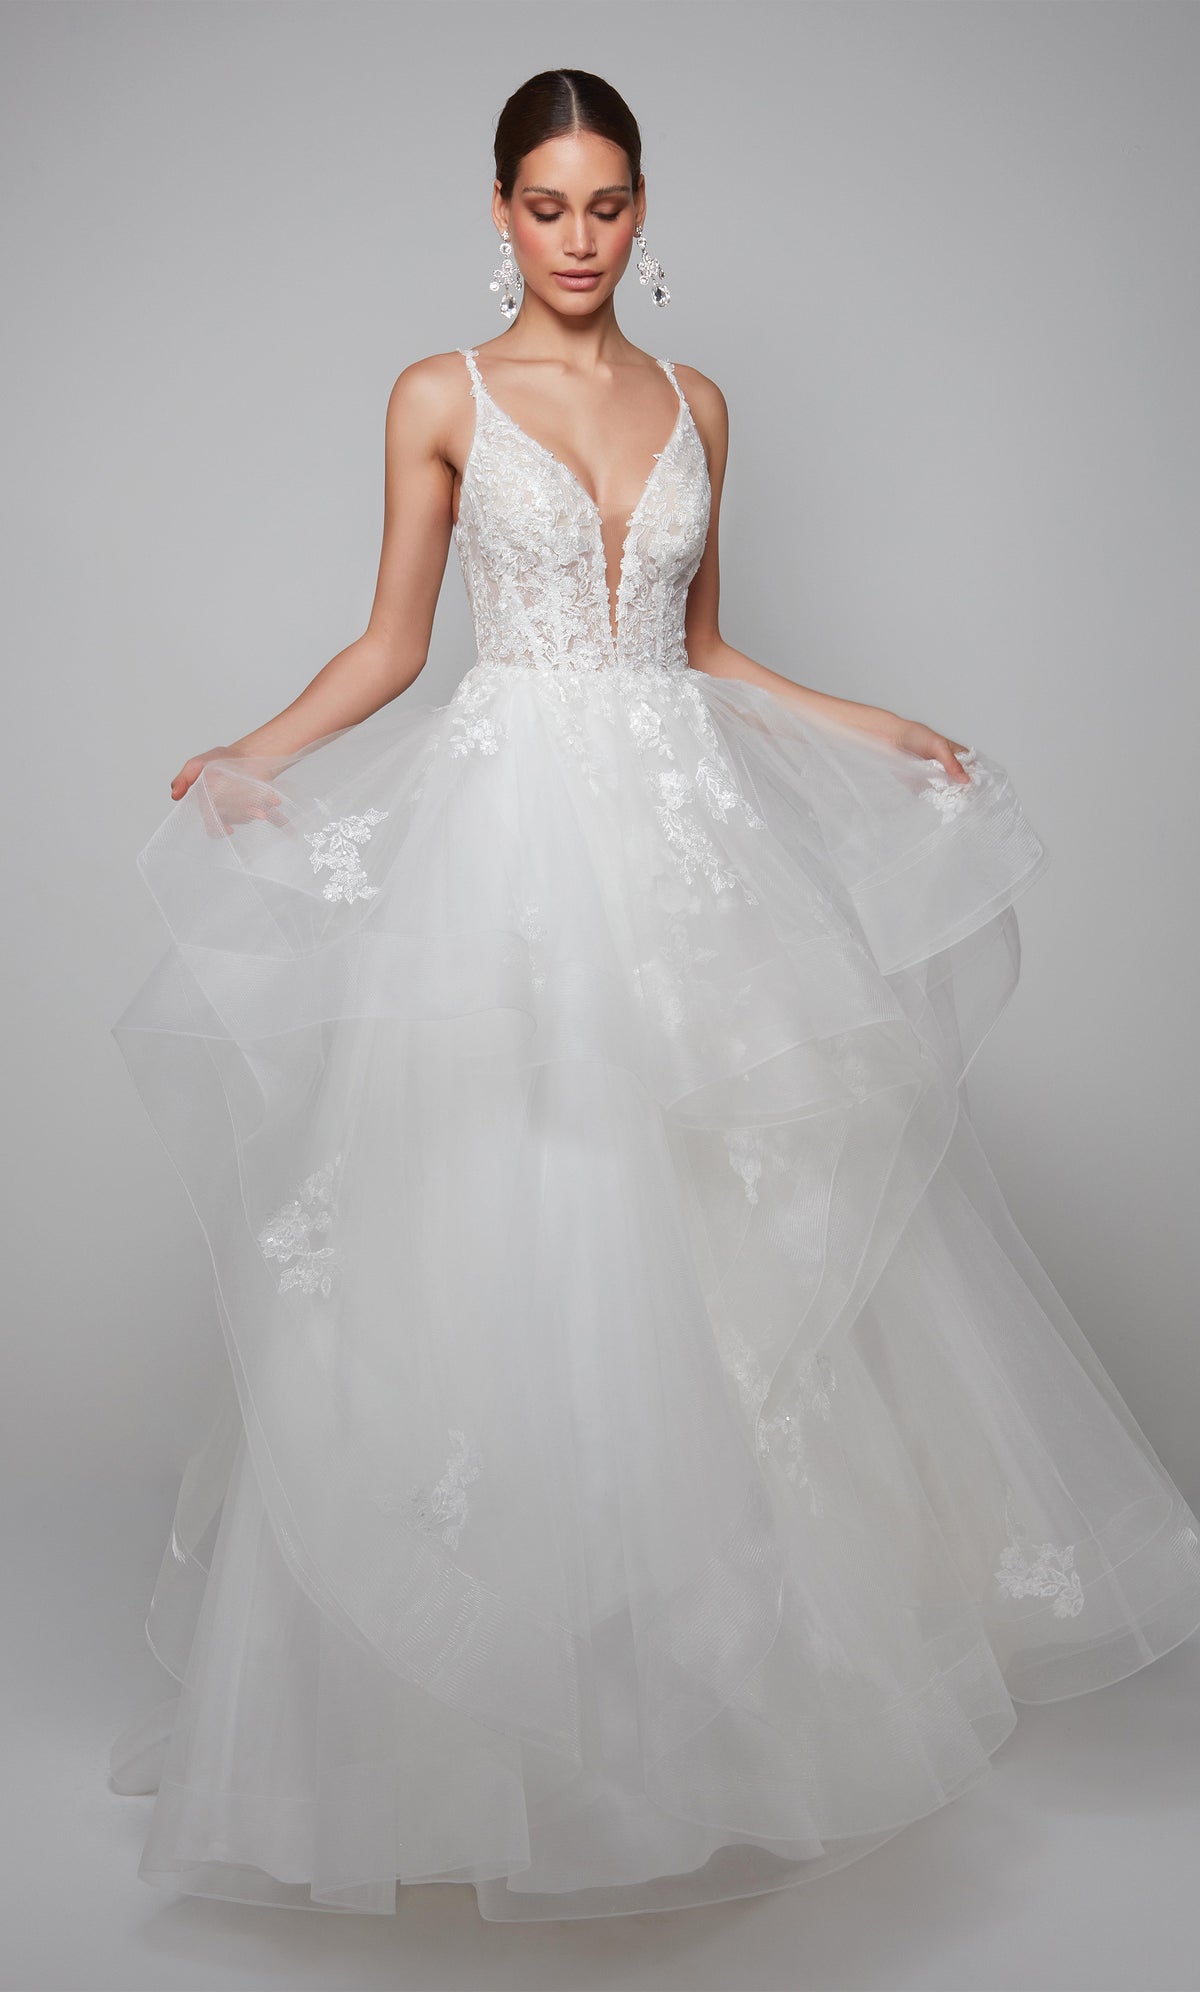 Plunging floral lace applique wedding dress with a sheer bodice and layered skirt in ivory.